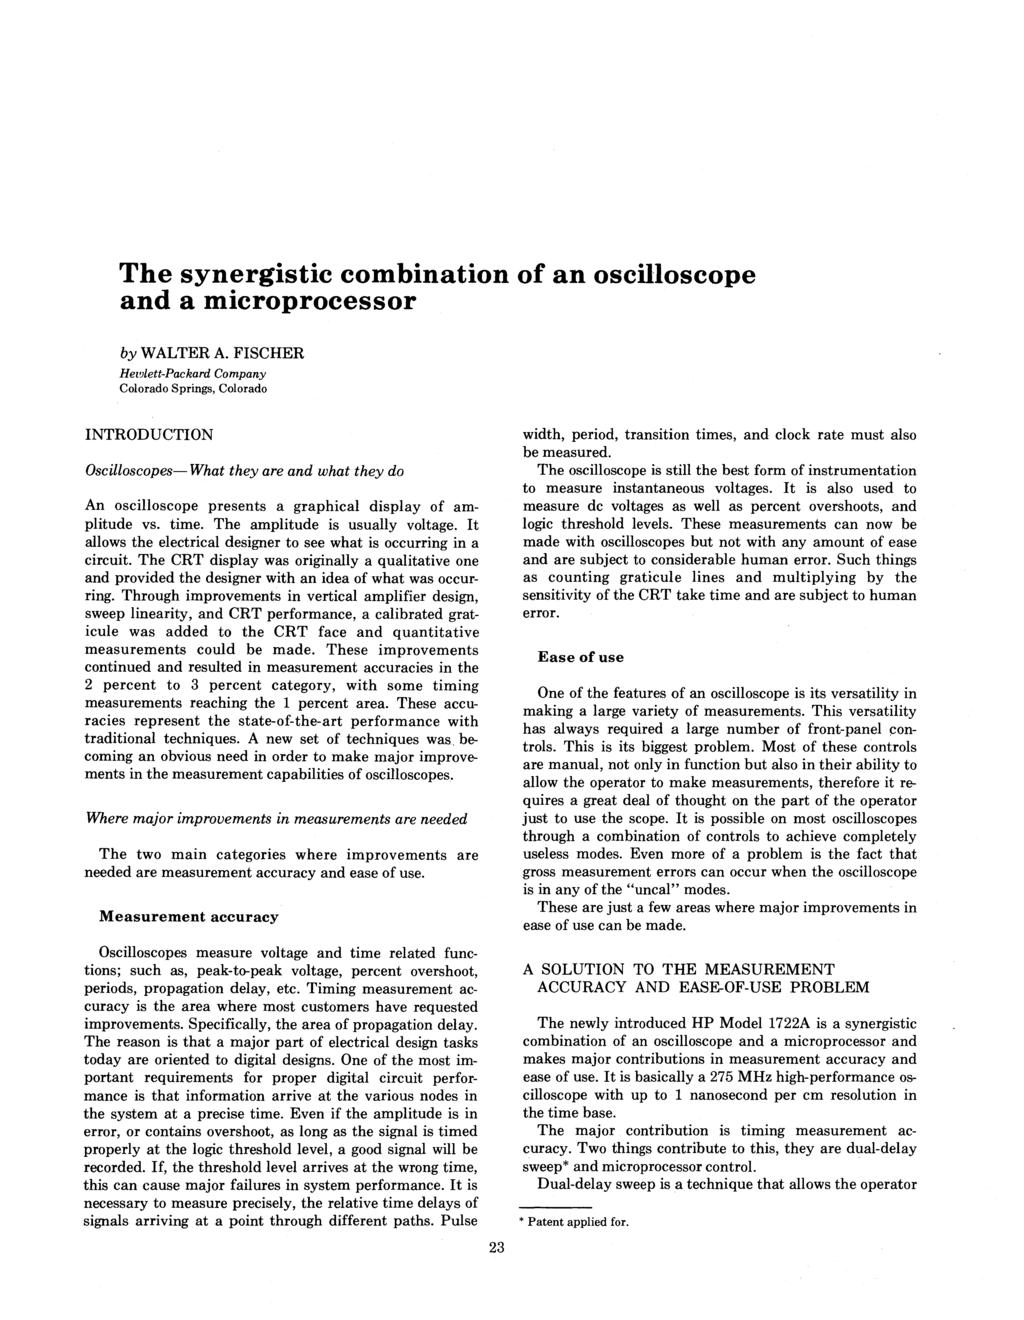 The synergistic combination of an oscilloscope and a microprocessor by WALTER A.